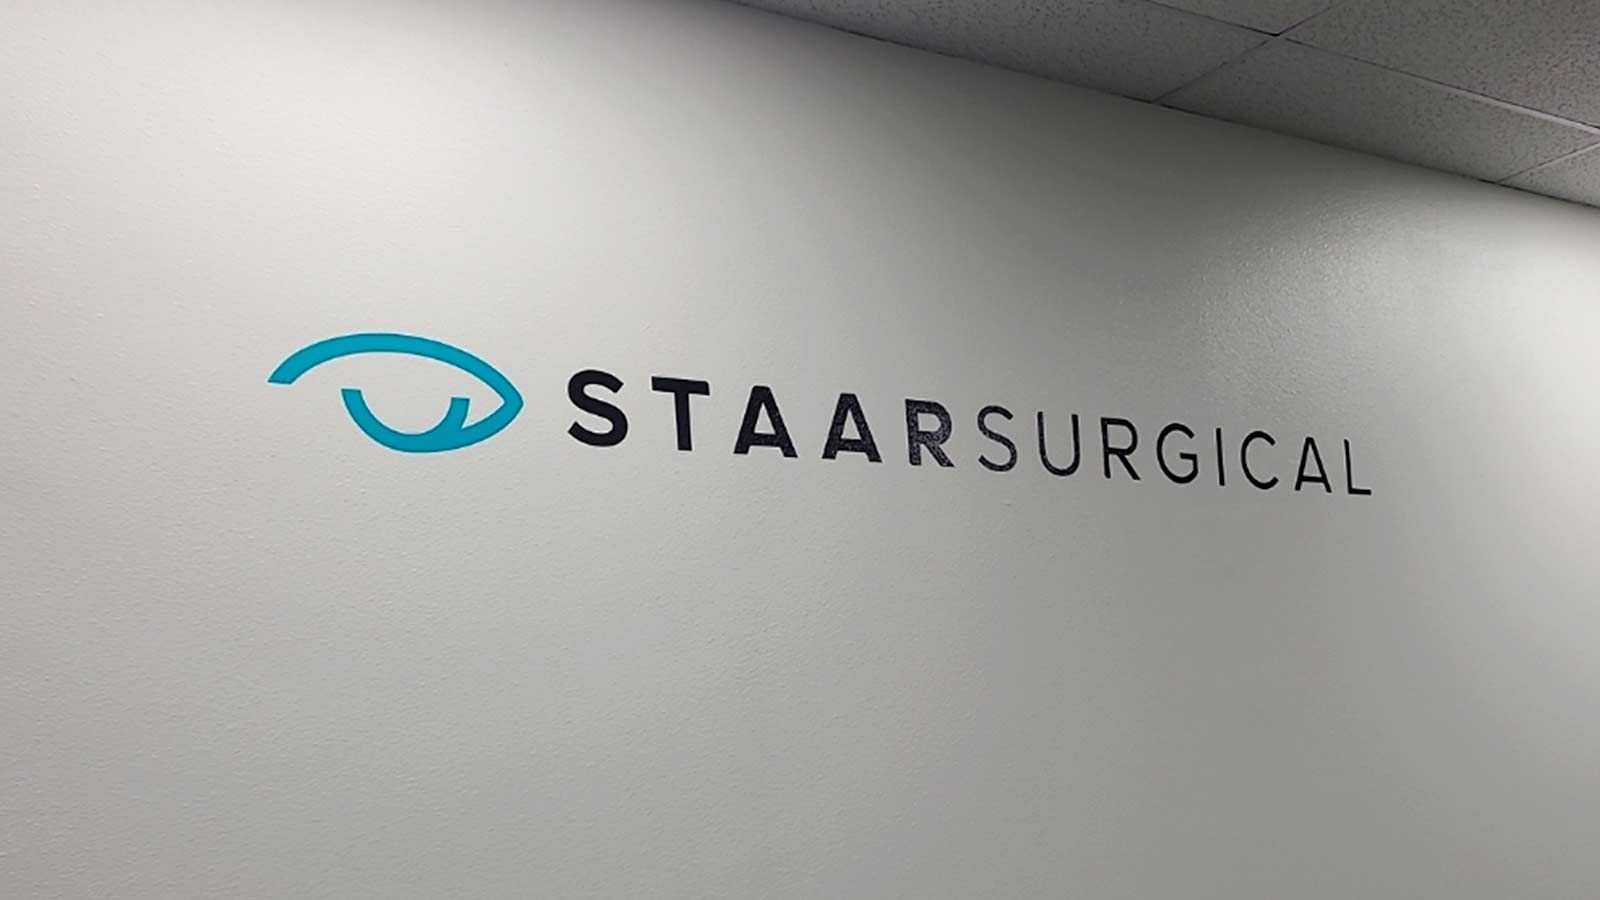 Staar Surgical office sign attached to the wall